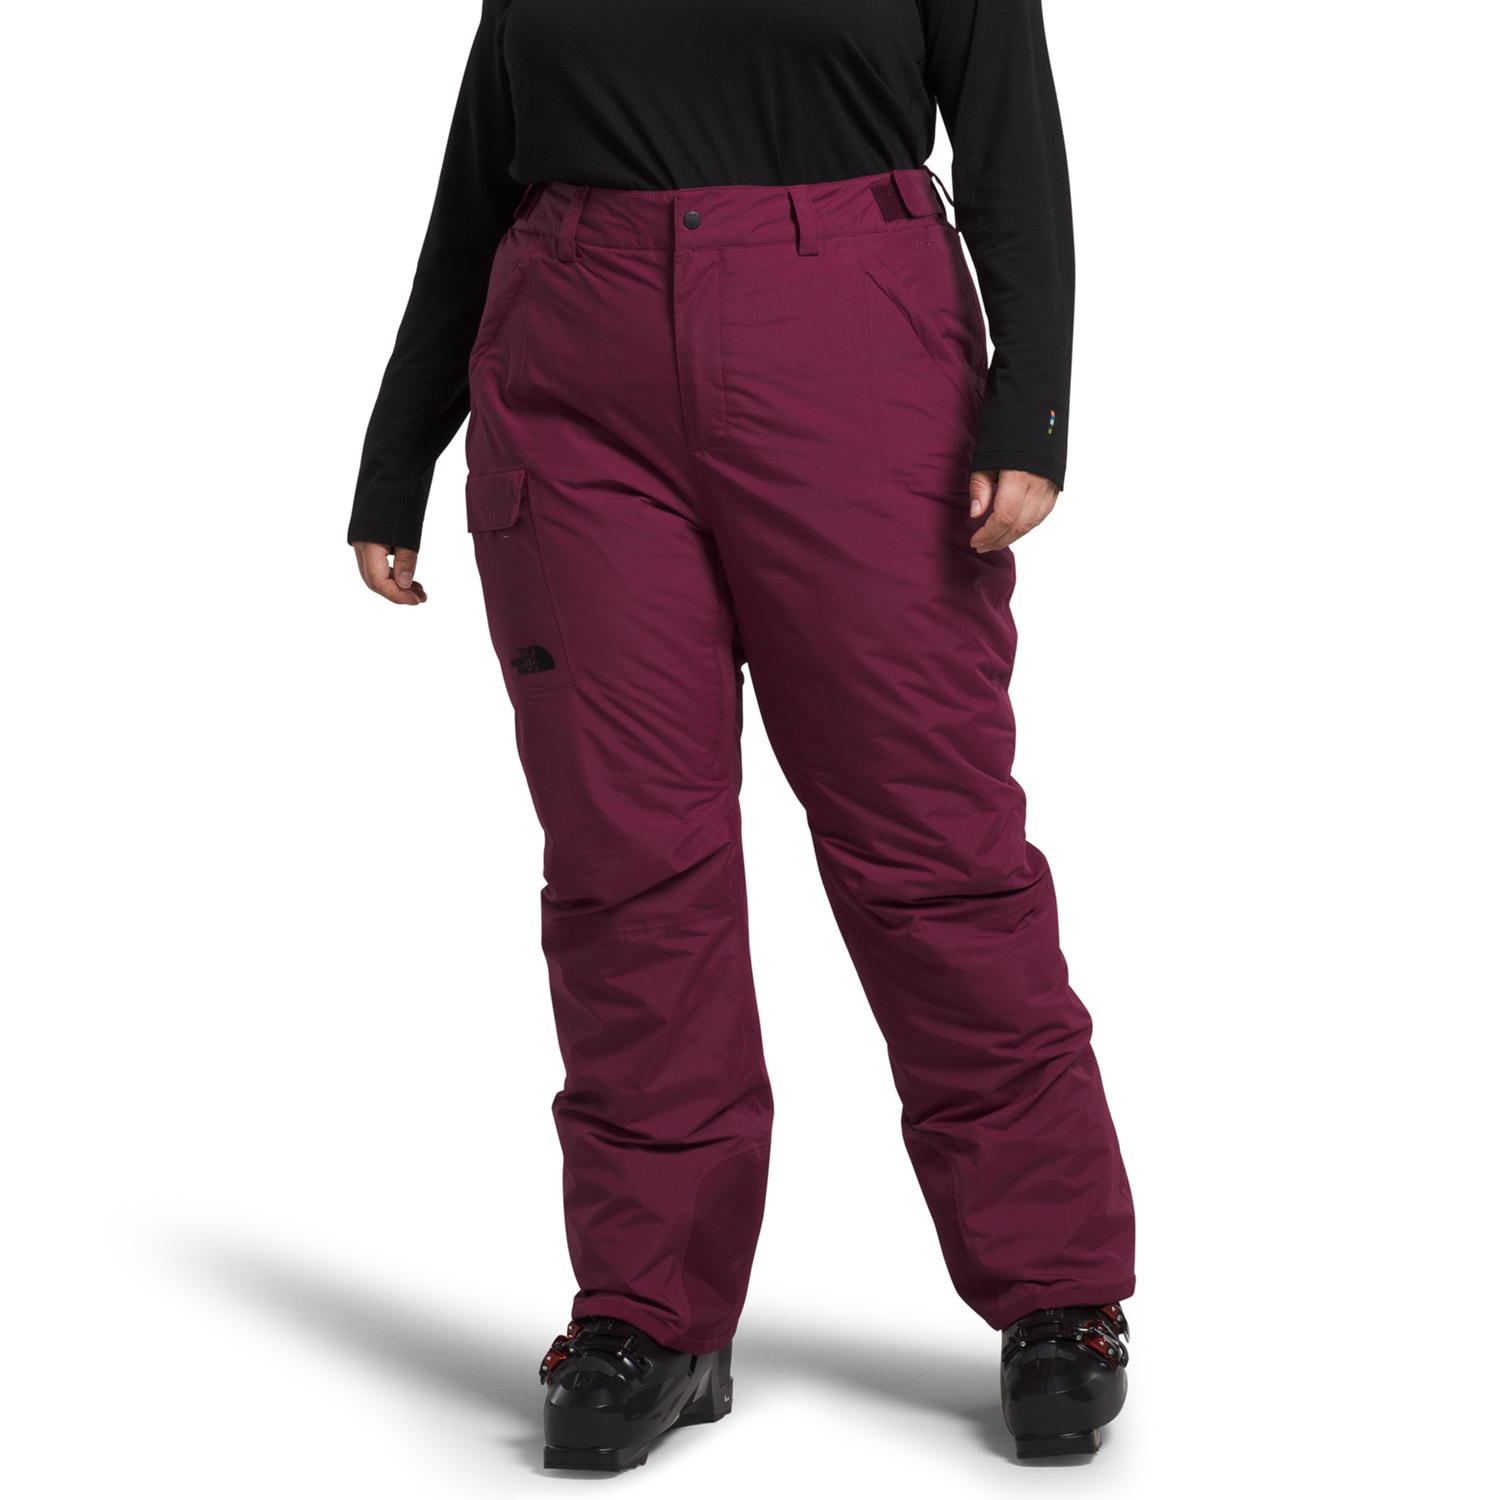 Брюки The North Face Freedom Insulated Plus, цвет Boysenberry брюки the north face freedom insulated plus цвет boysenberry